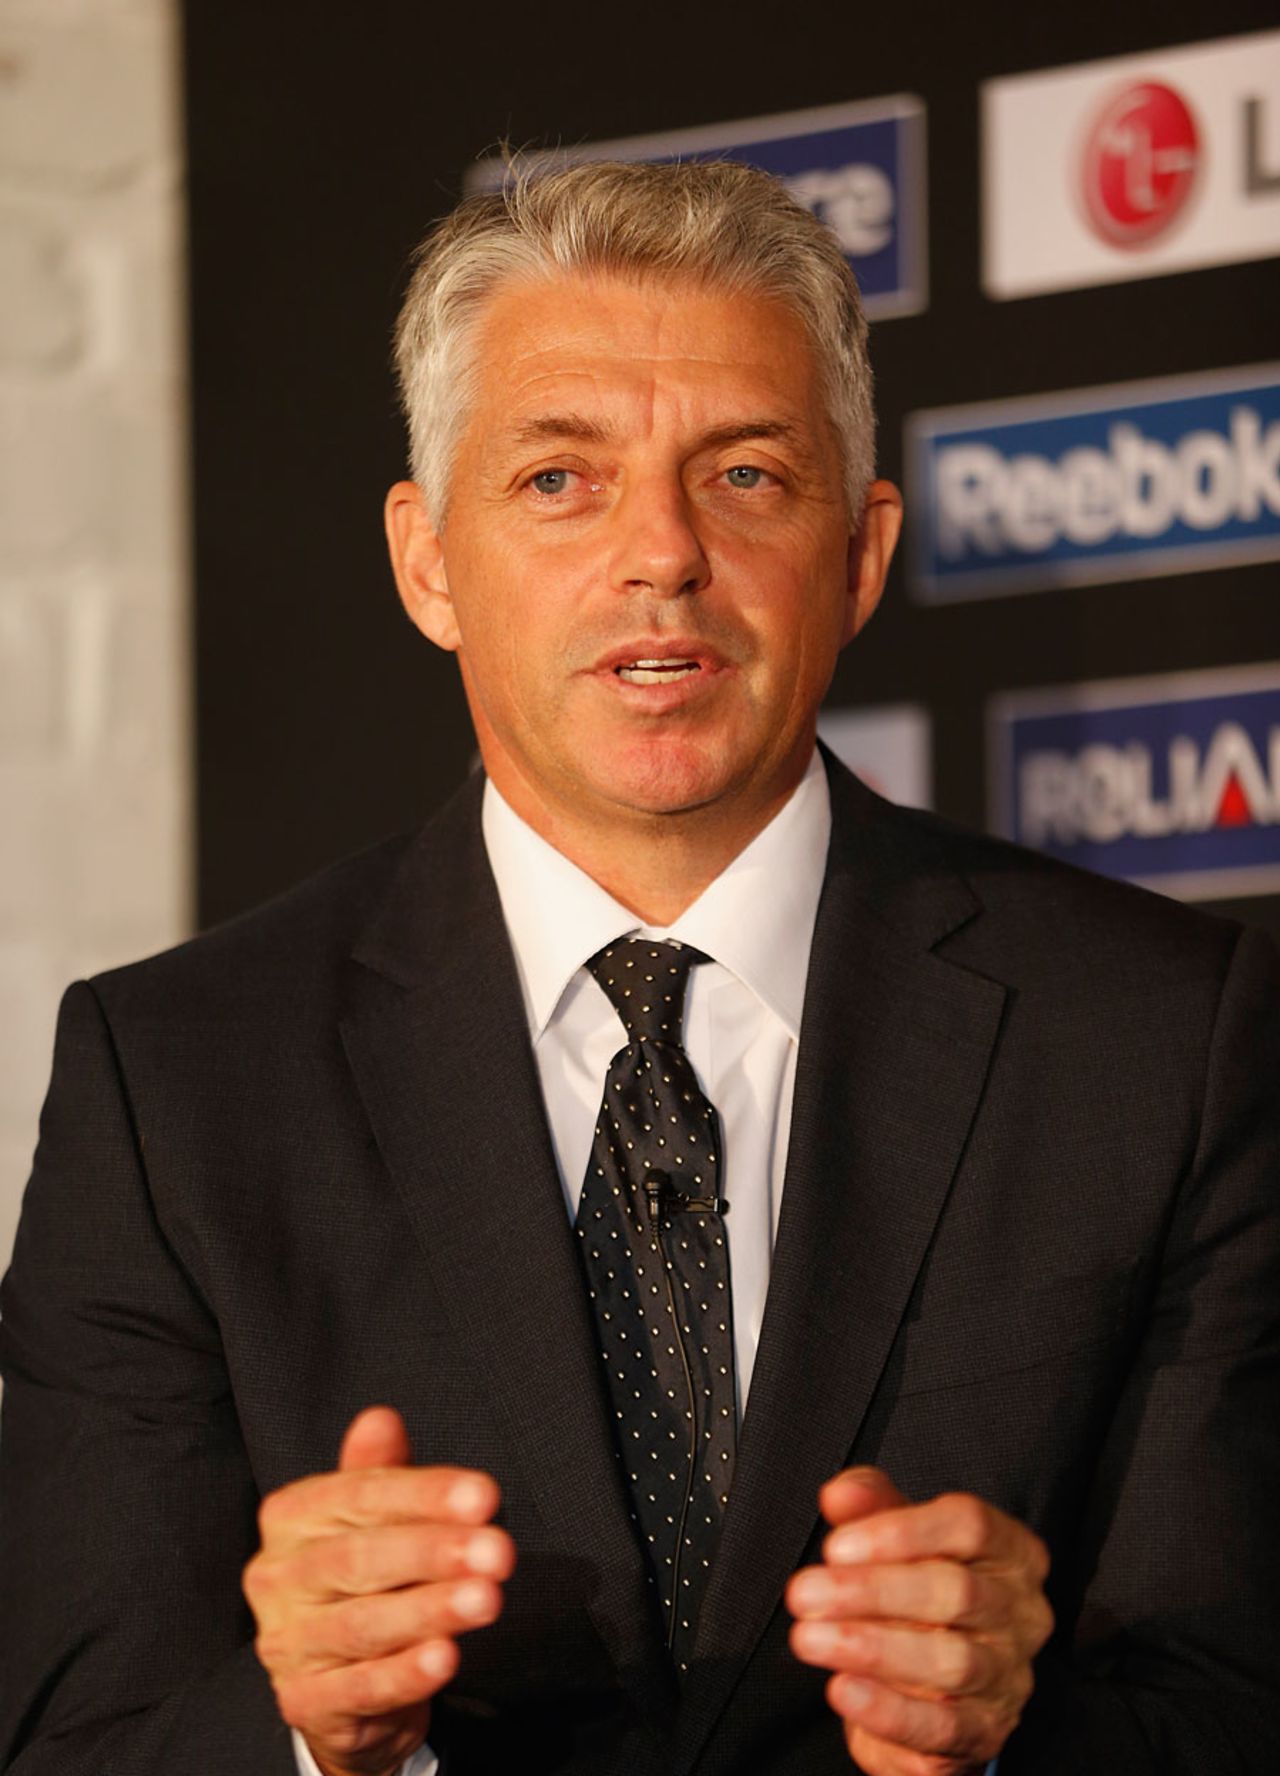 Dave Richardson speaks at the Champions Trophy event, London, October 17, 2012